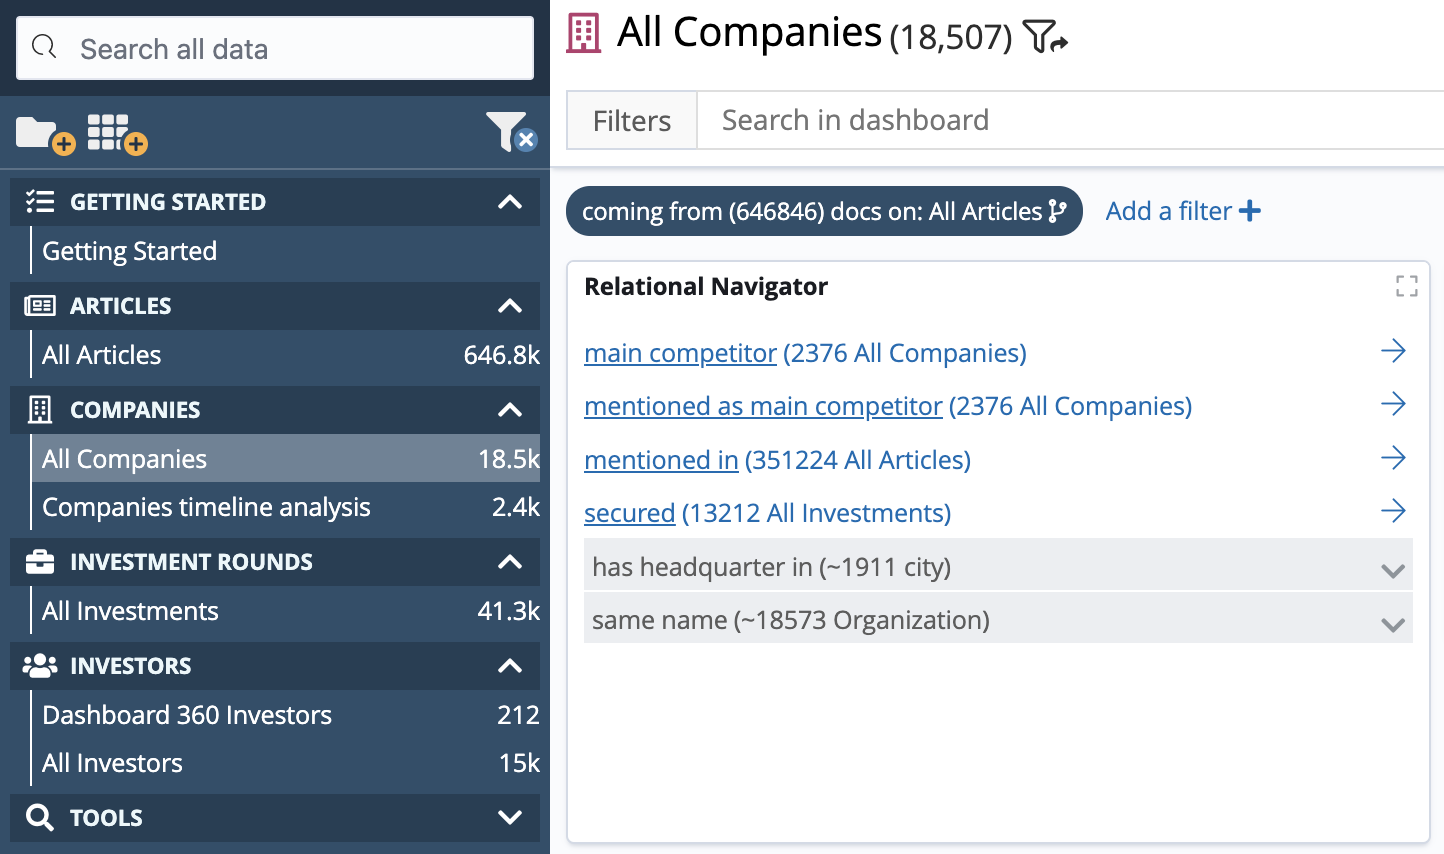 Relational Navigator filter on the Companies dashboard